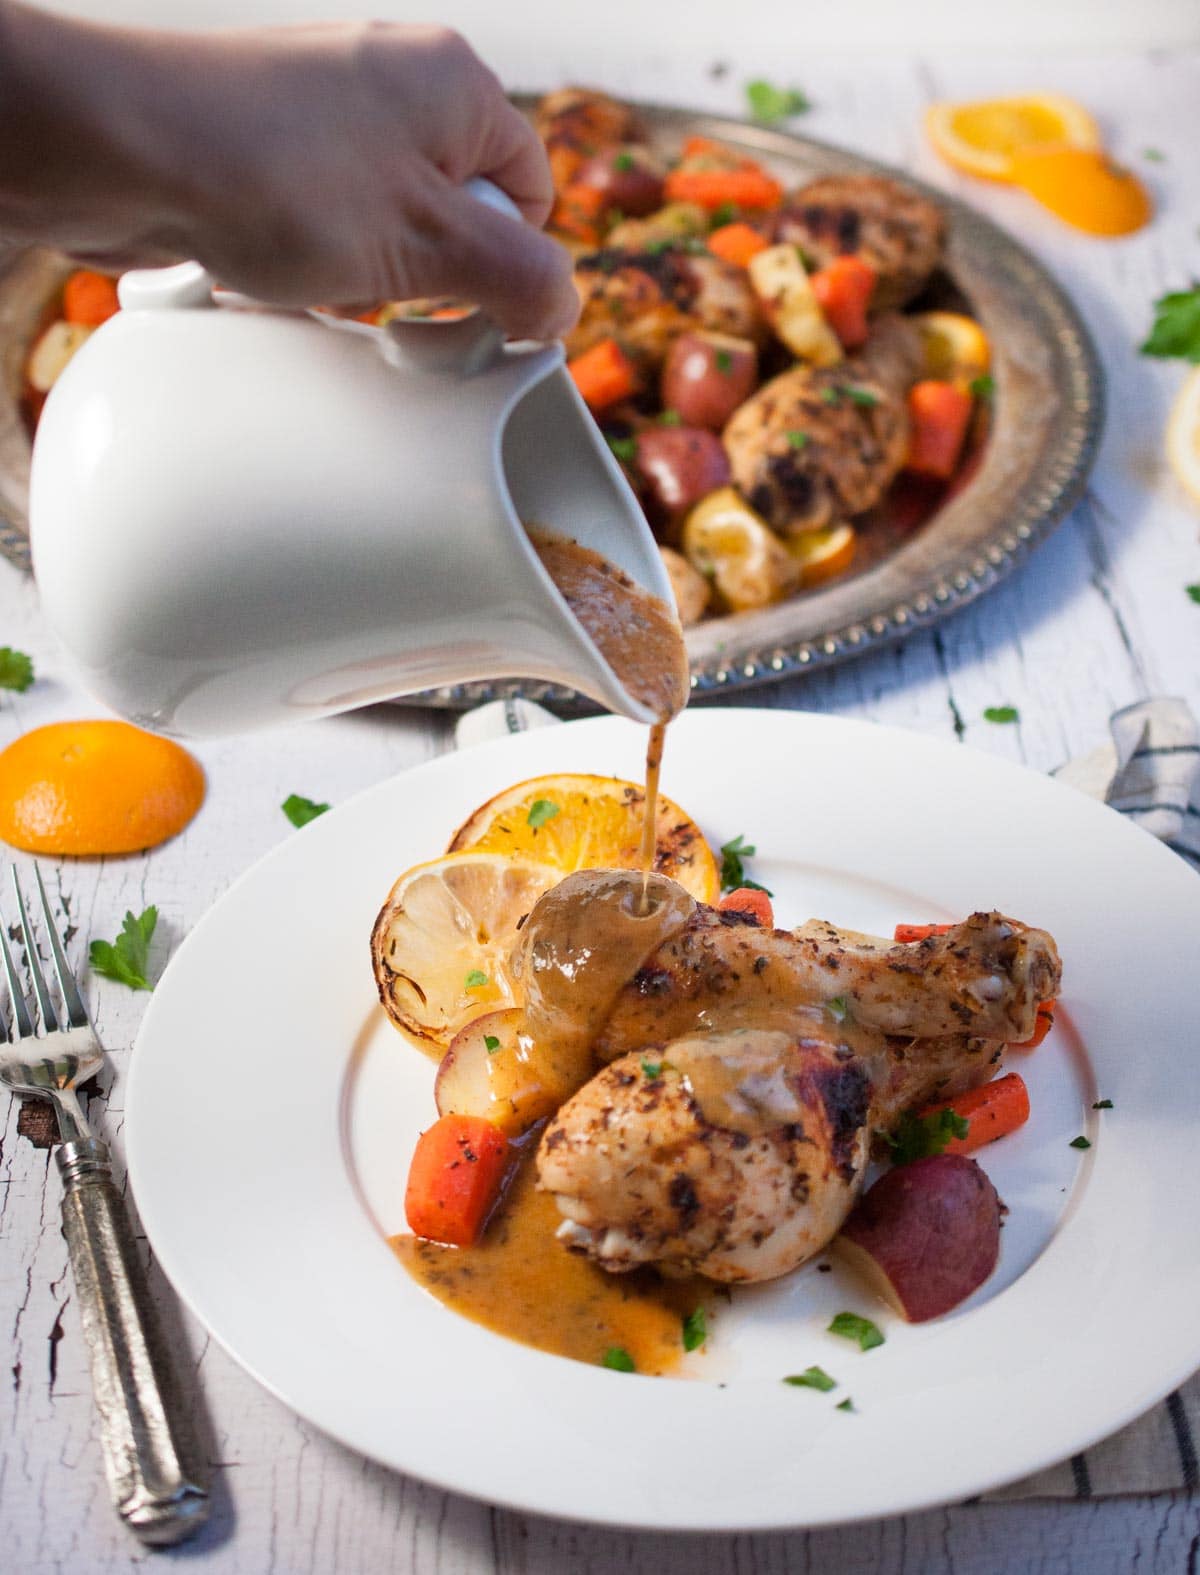 Baked citrus chicken and vegetables is a comforting, delicious, unique one dish meal that is impressive enough to serve to guests without being too fussy.